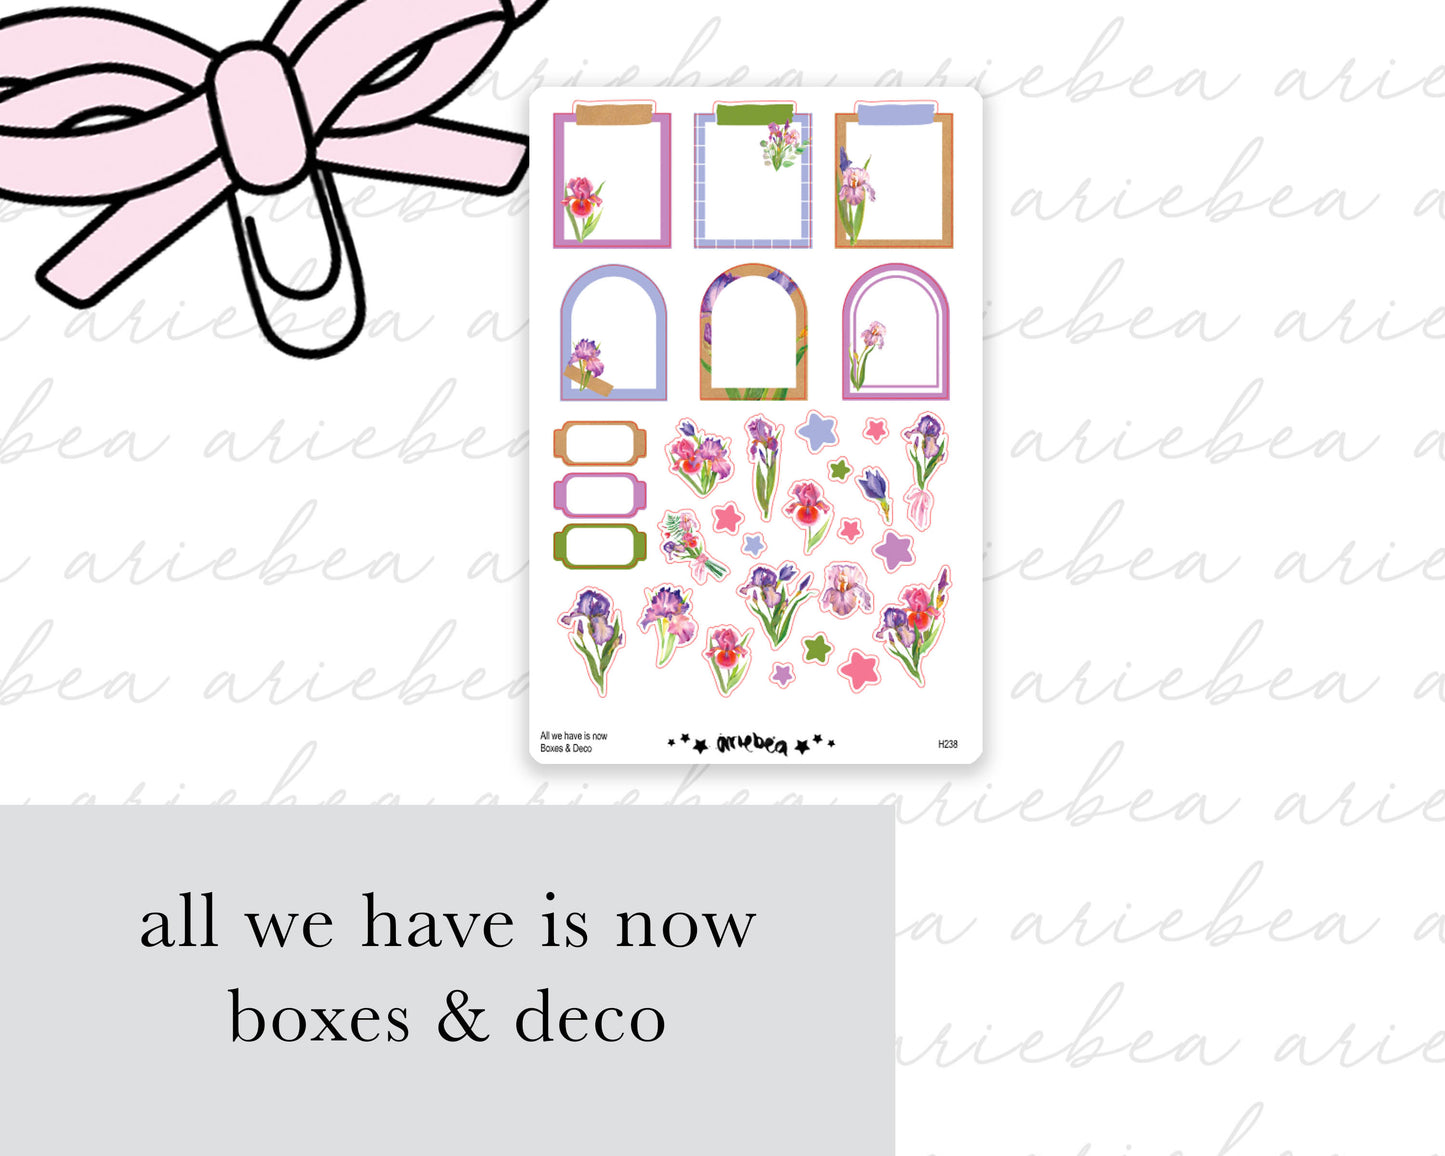 All we need is now Boxes & Deco